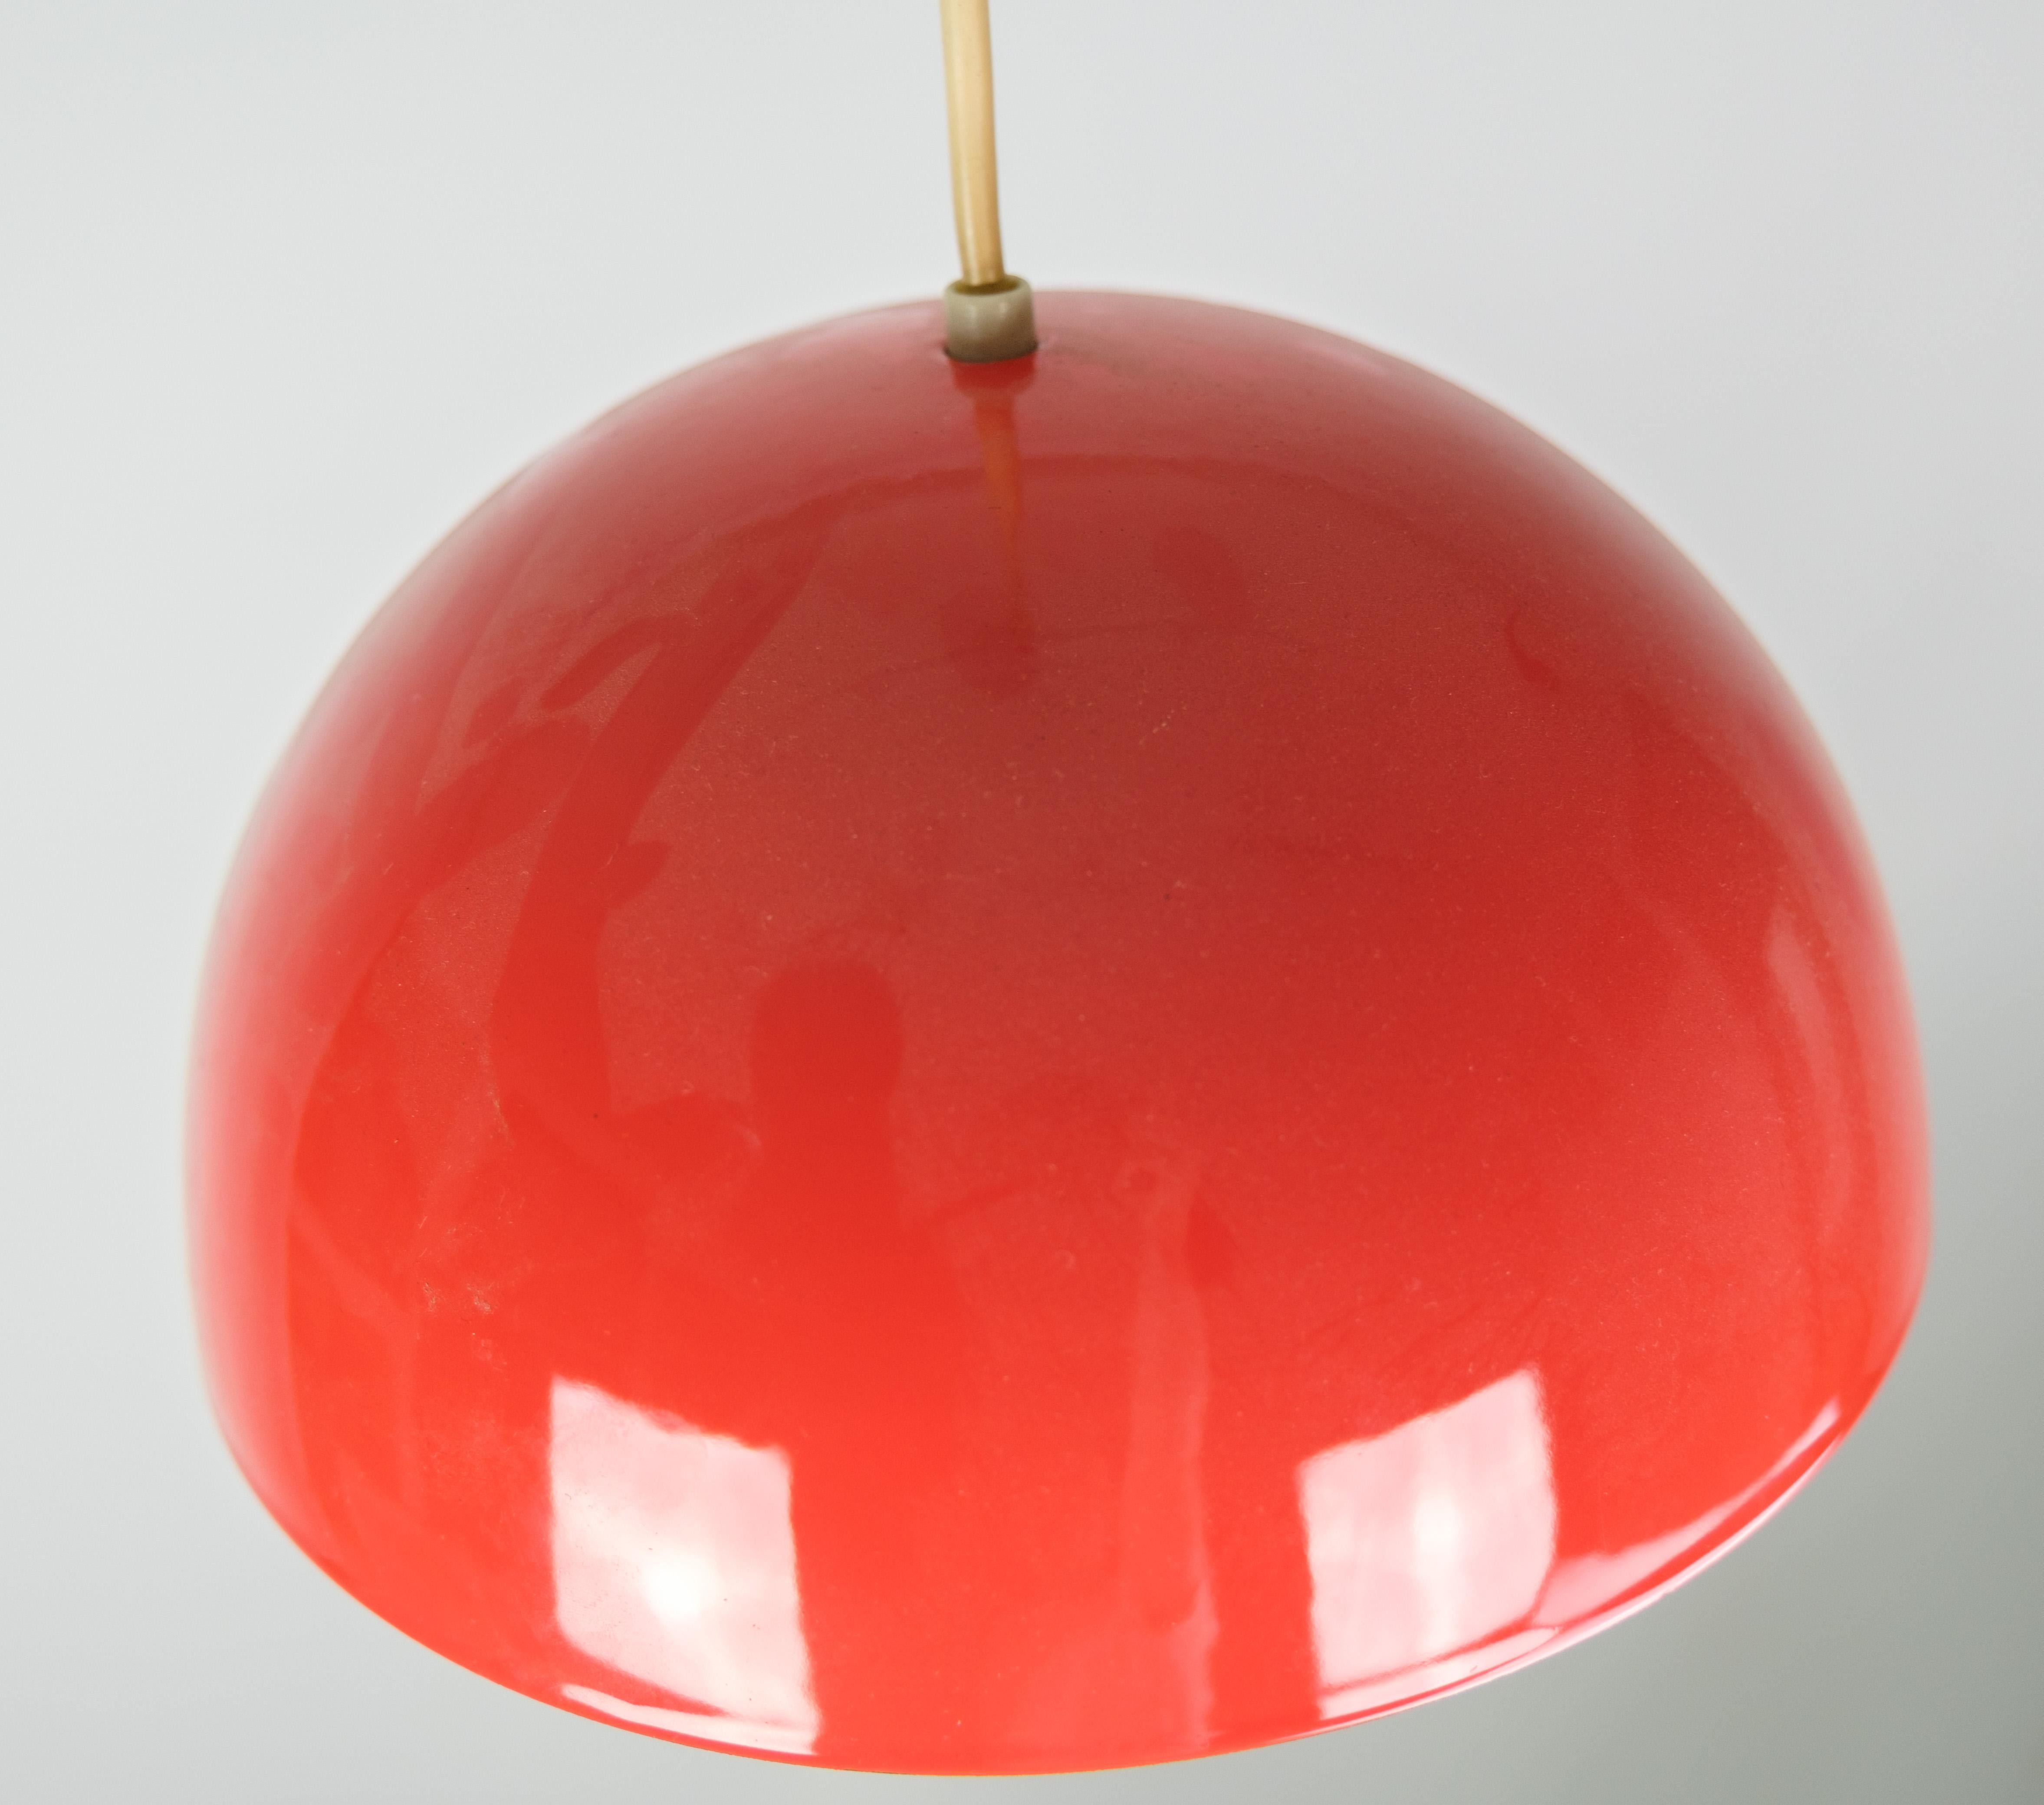 Late 20th Century Flowerpot Ceiling Lamp Model VP1 Made By Verner Panton VP1 From 1970s For Sale